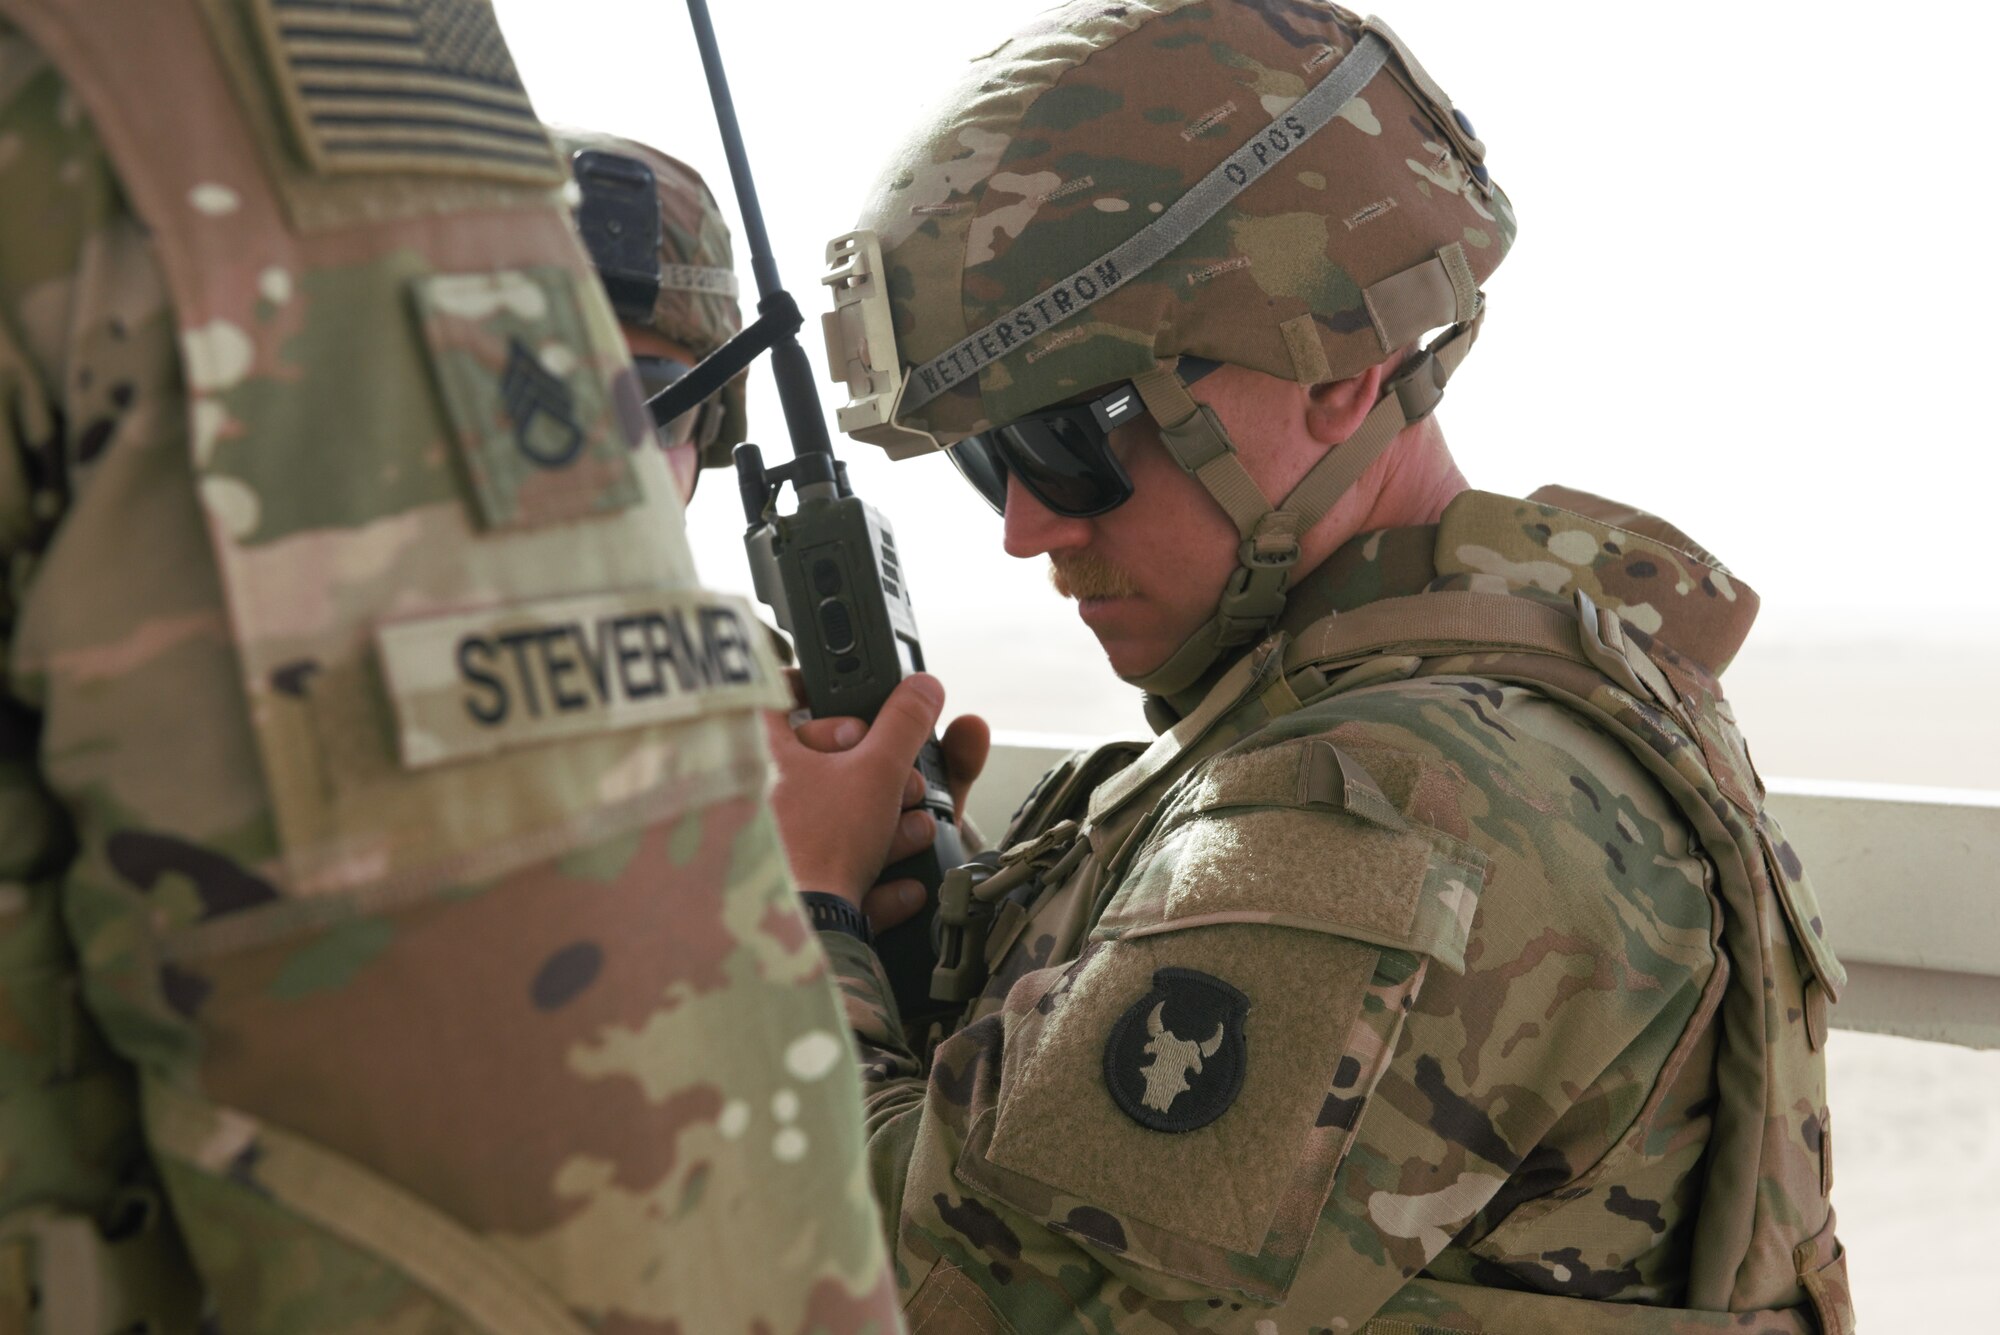 A photo of a Soldier using a radio